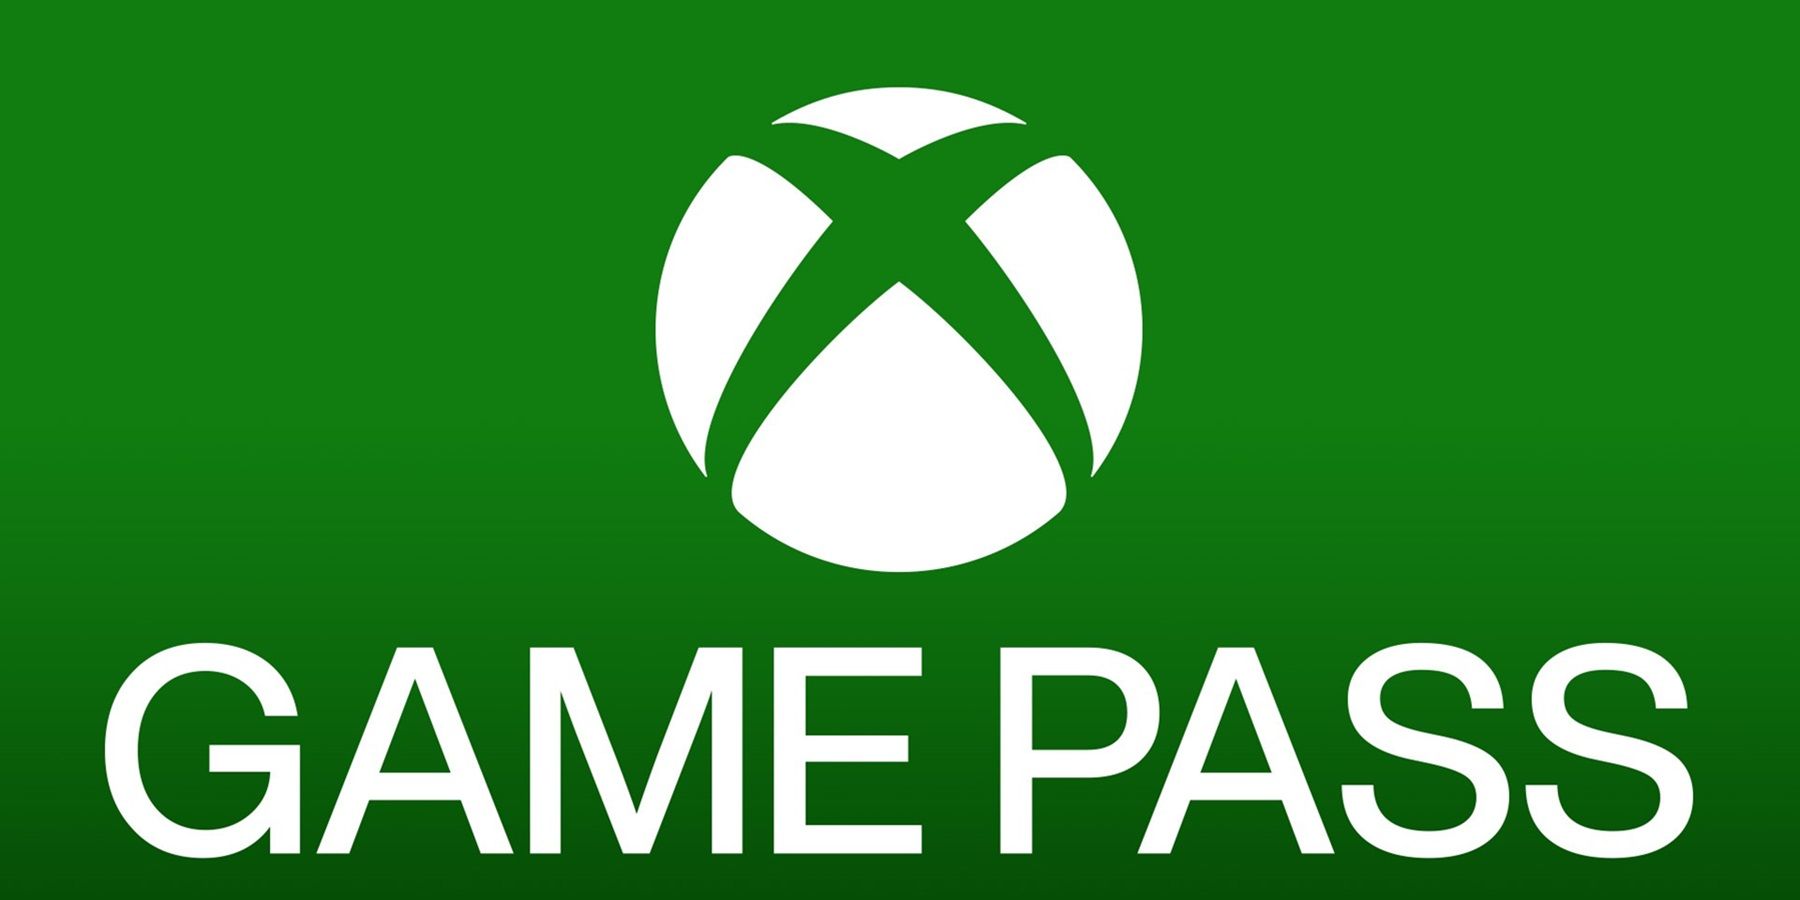 xbox game pass logo with green background